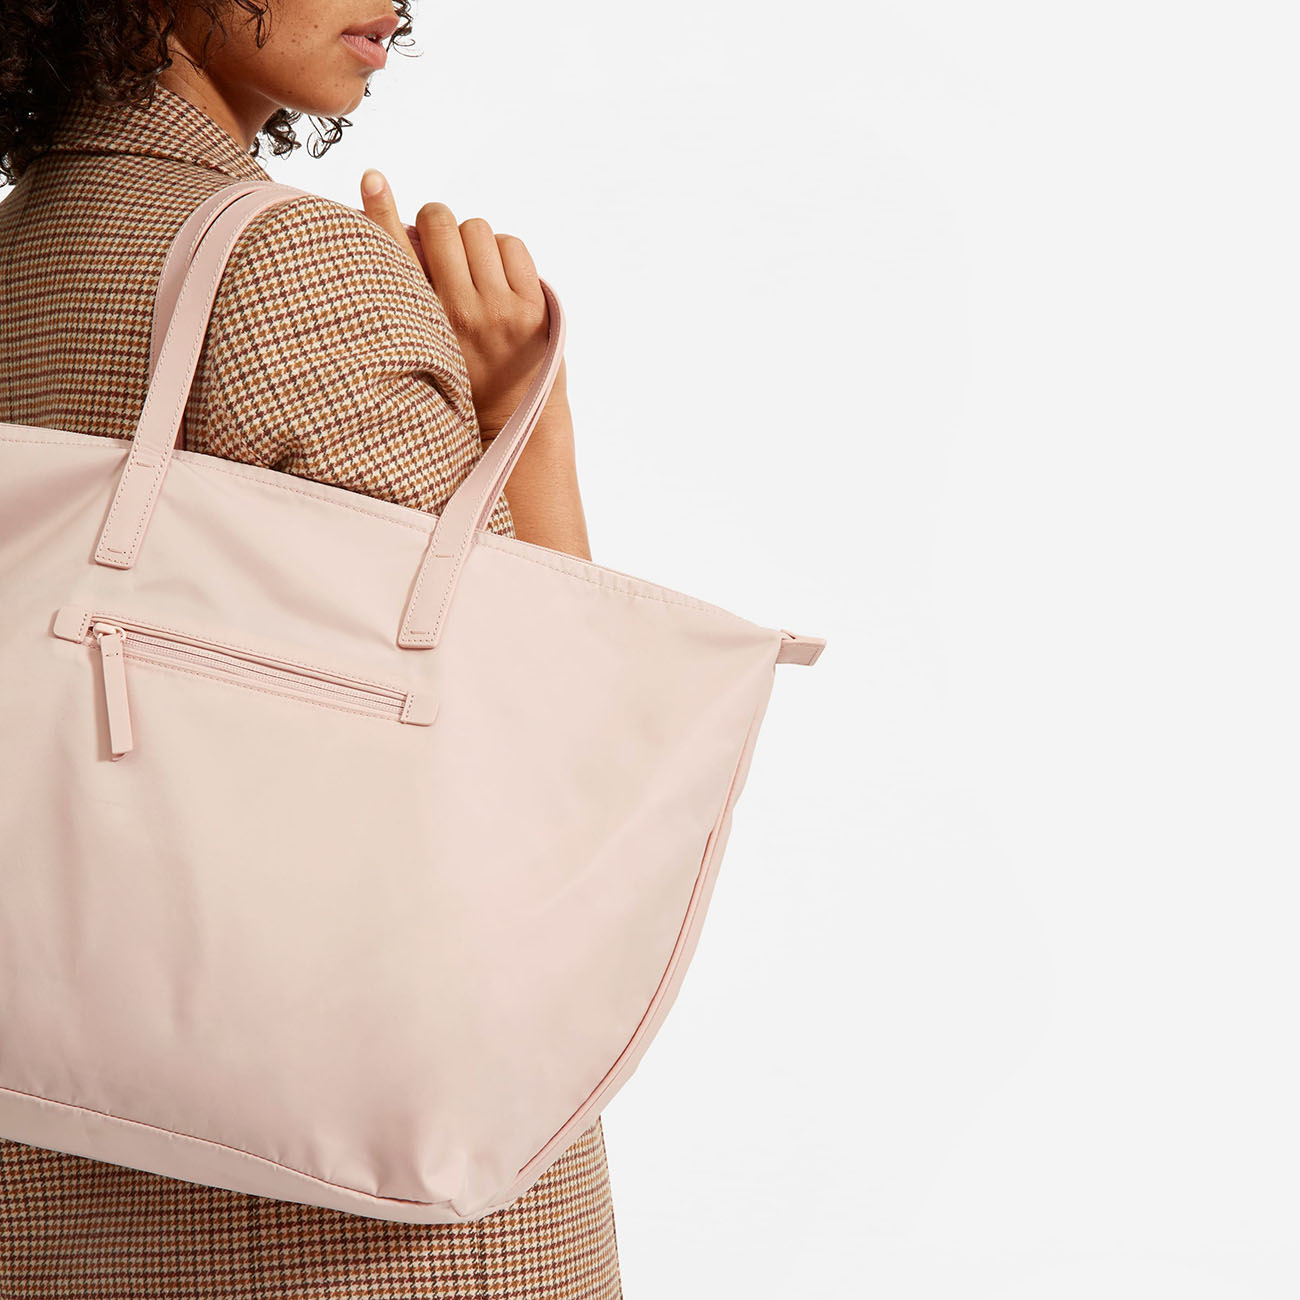 pale pink ReNew Traveler Tote from Everlane